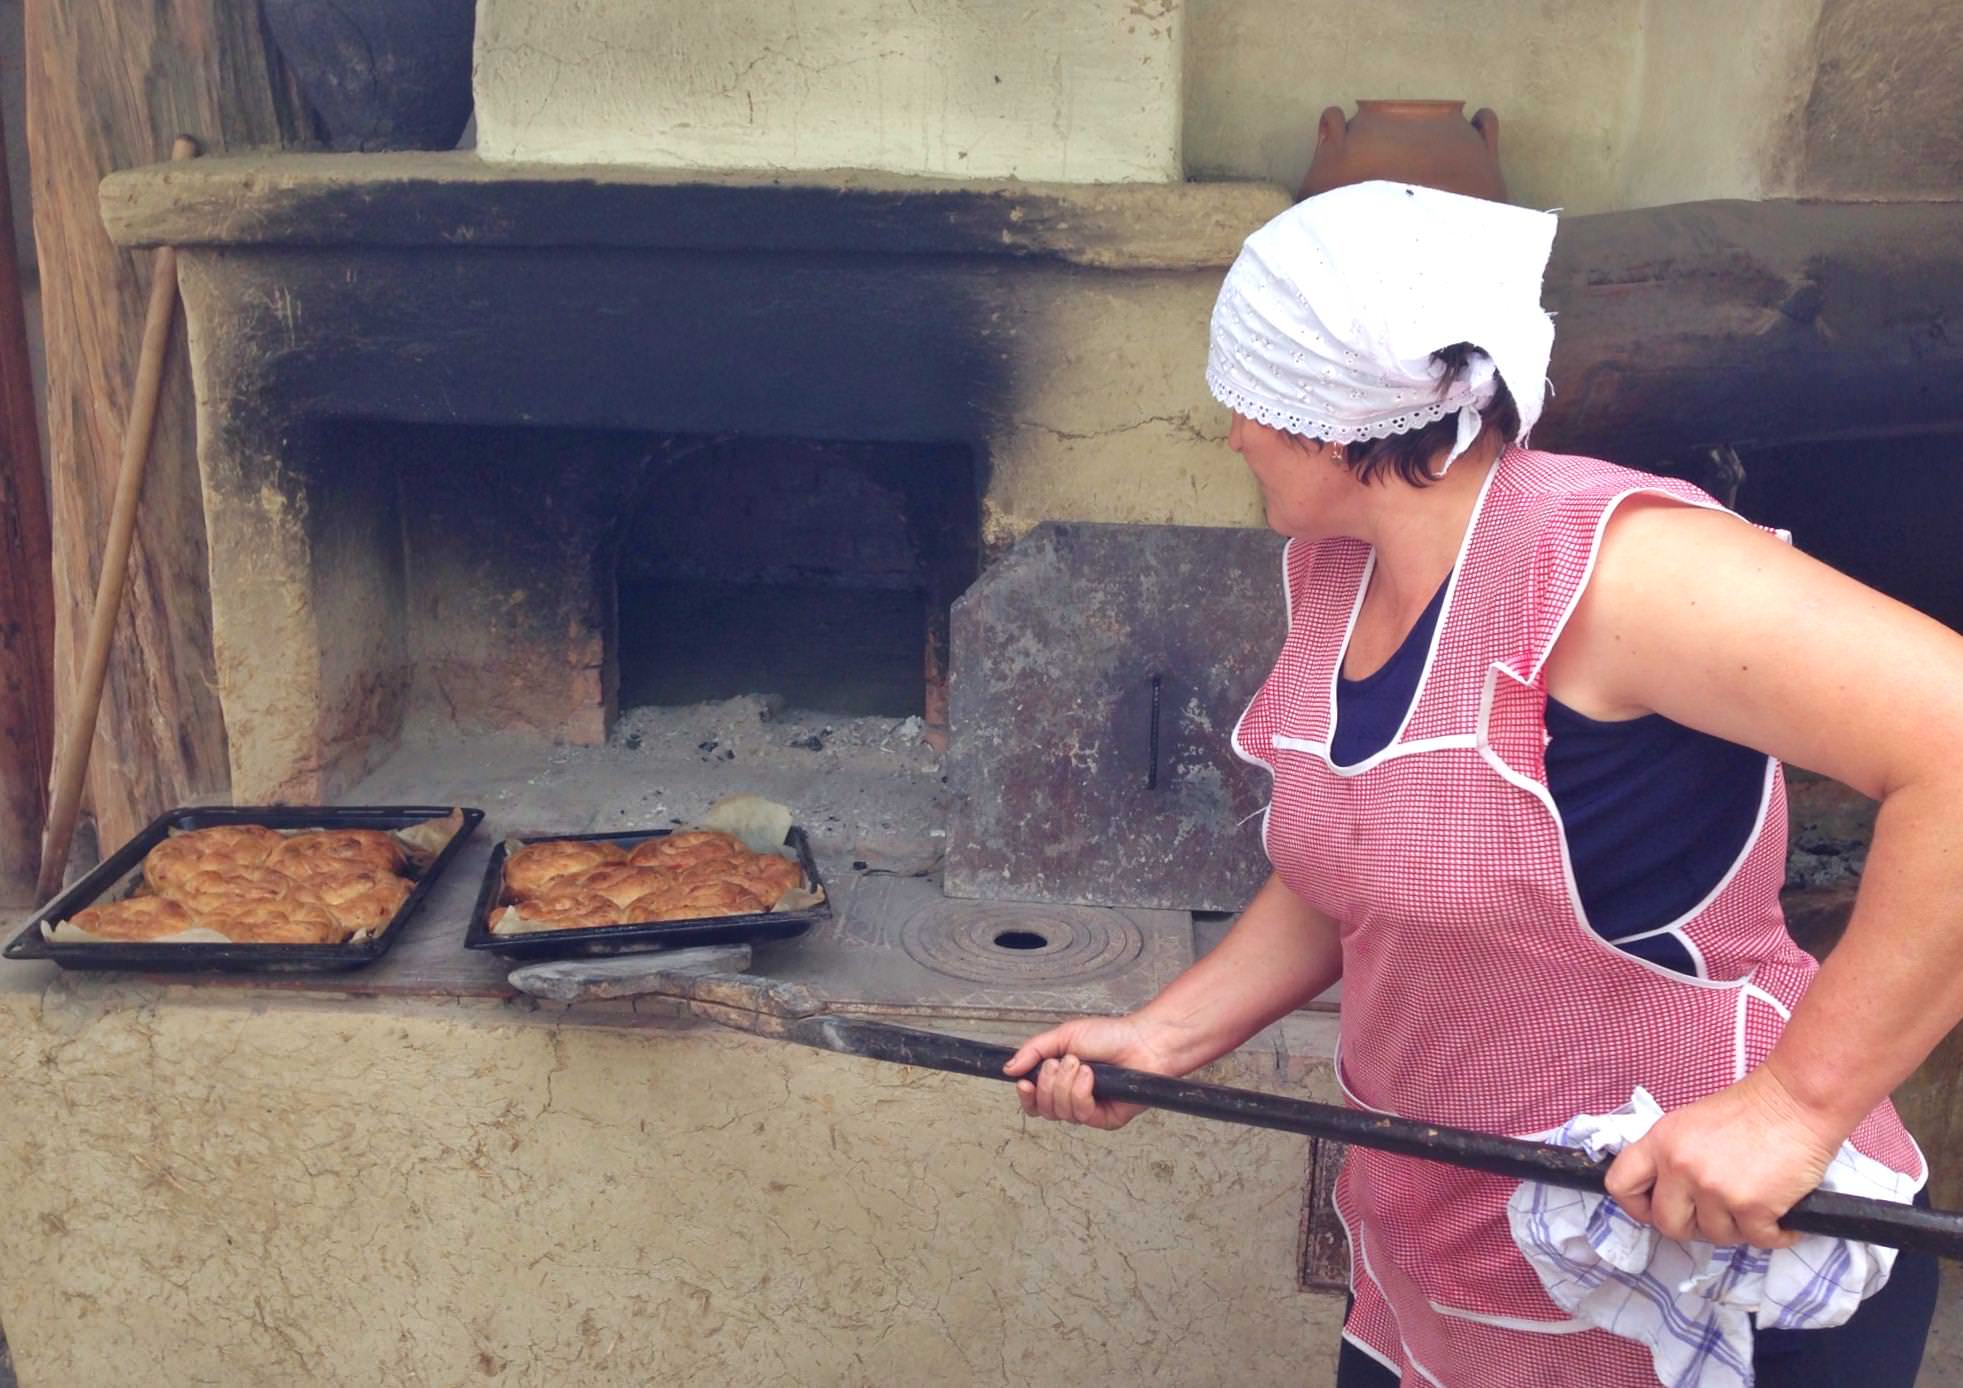 If you stay at Butuceni, you'll have the chance to try your hand at making traditional food.